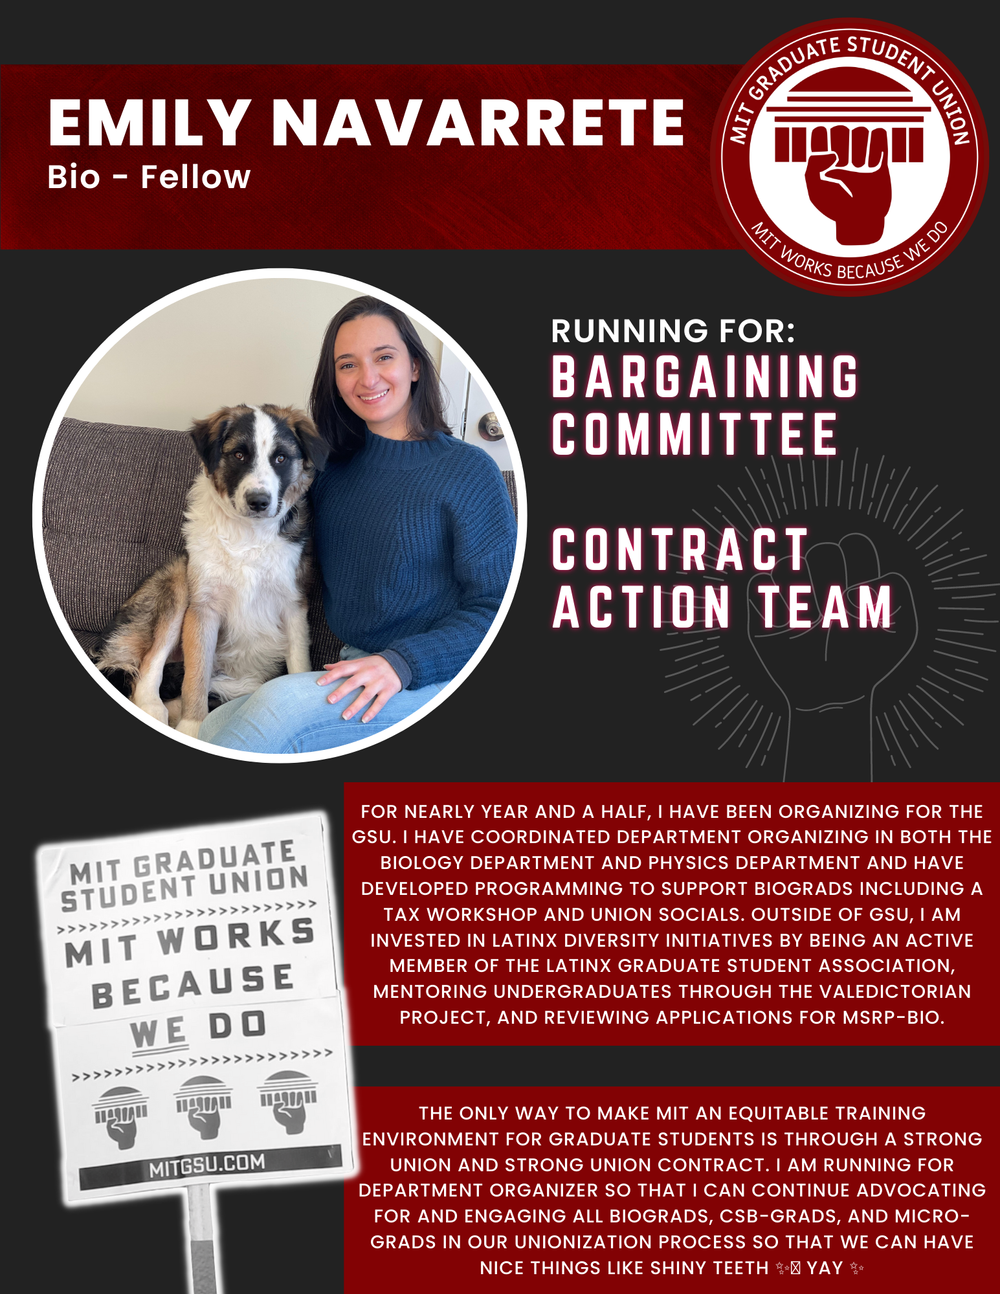  EMILY NAVARRETE Bio - Fellow   RUNNING FOR: Bargaining Committee  Contract Action Team  FOR NEARLY YEAR AND A HALF, I HAVE BEEN ORGANIZING FOR THE GSU. I HAVE COORDINATED DEPARTMENT ORGANIZING IN BOTH THE BIOLOGY DEPARTMENT AND PHYSICS DEPARTMENT AN